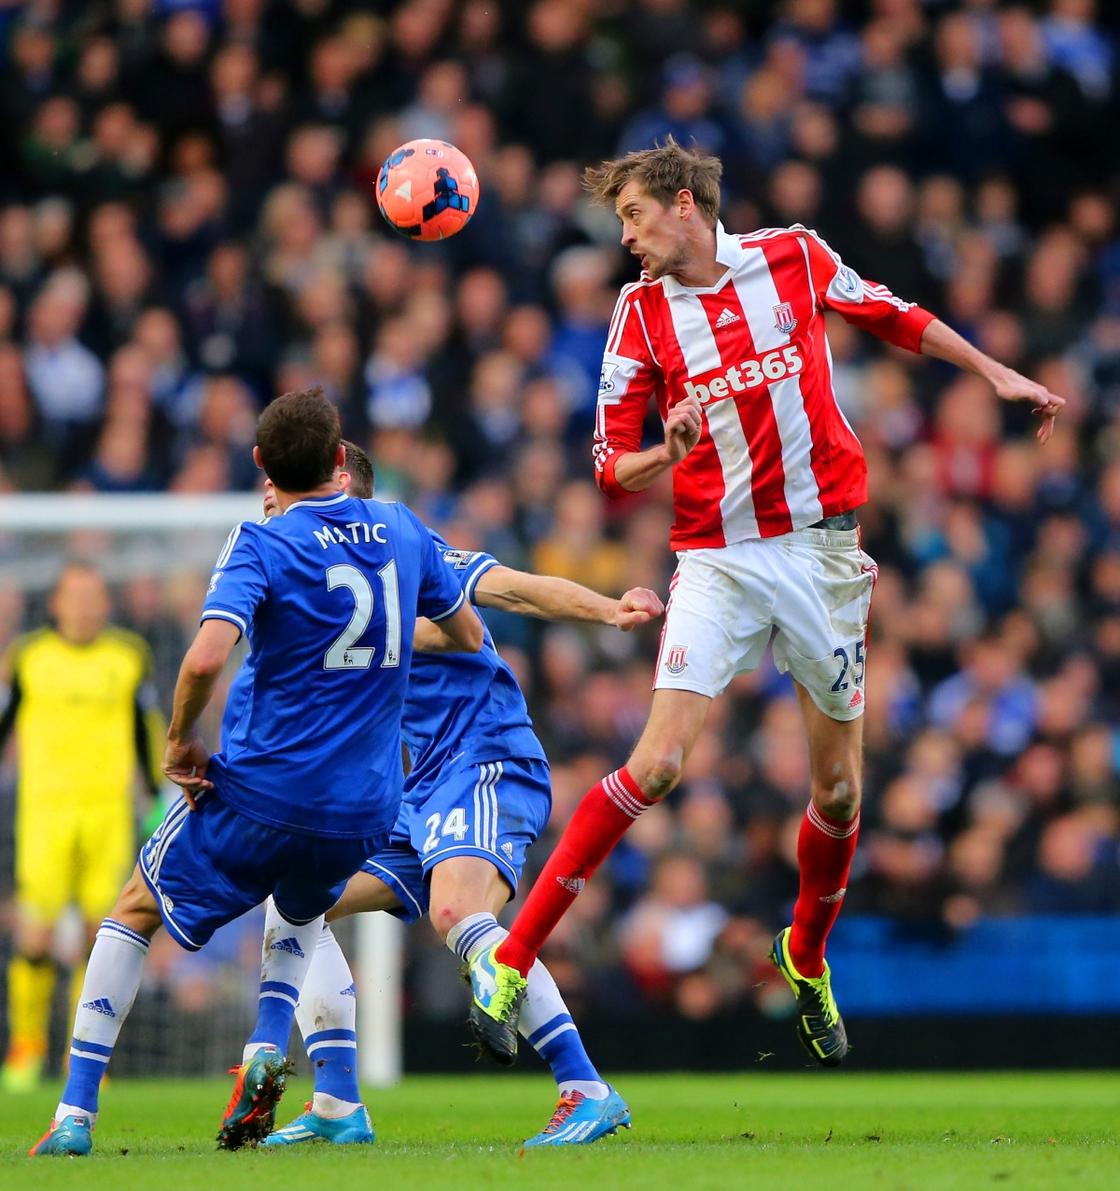 What are the total career goals for Peter Crouch?